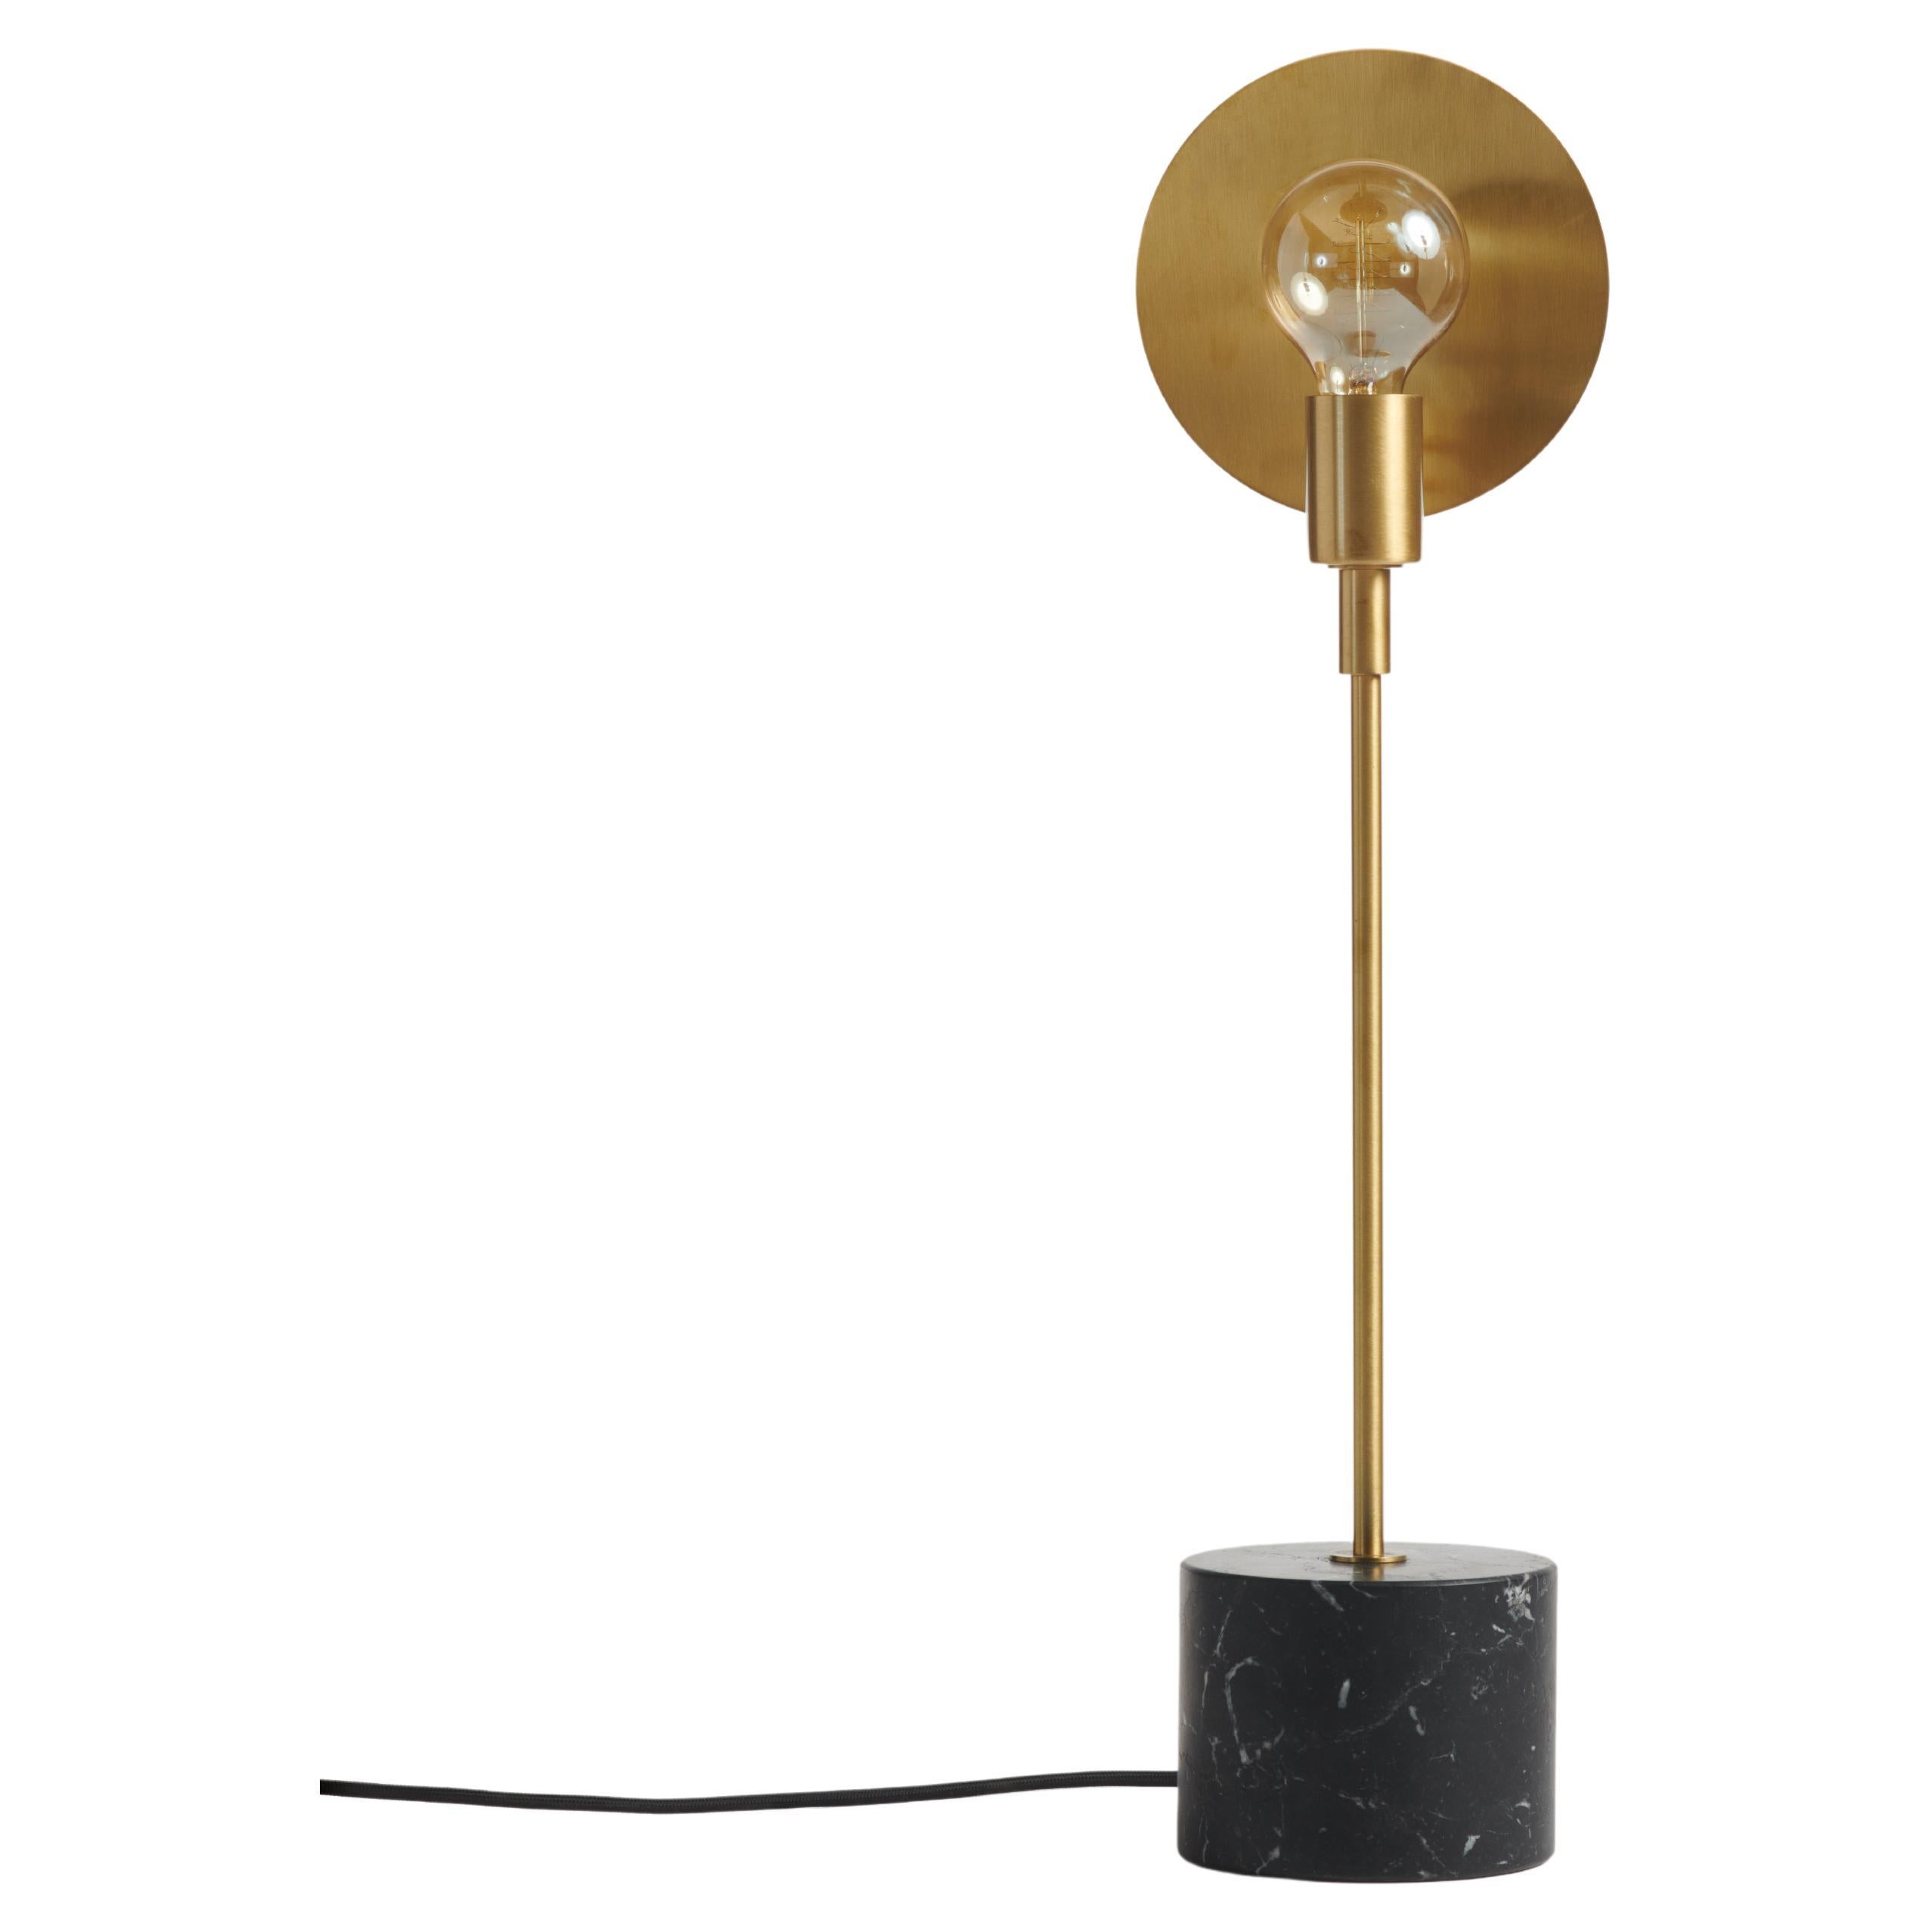 Essential Italian Table Lamp "Vanessa," in Satin Brass and Black Marble